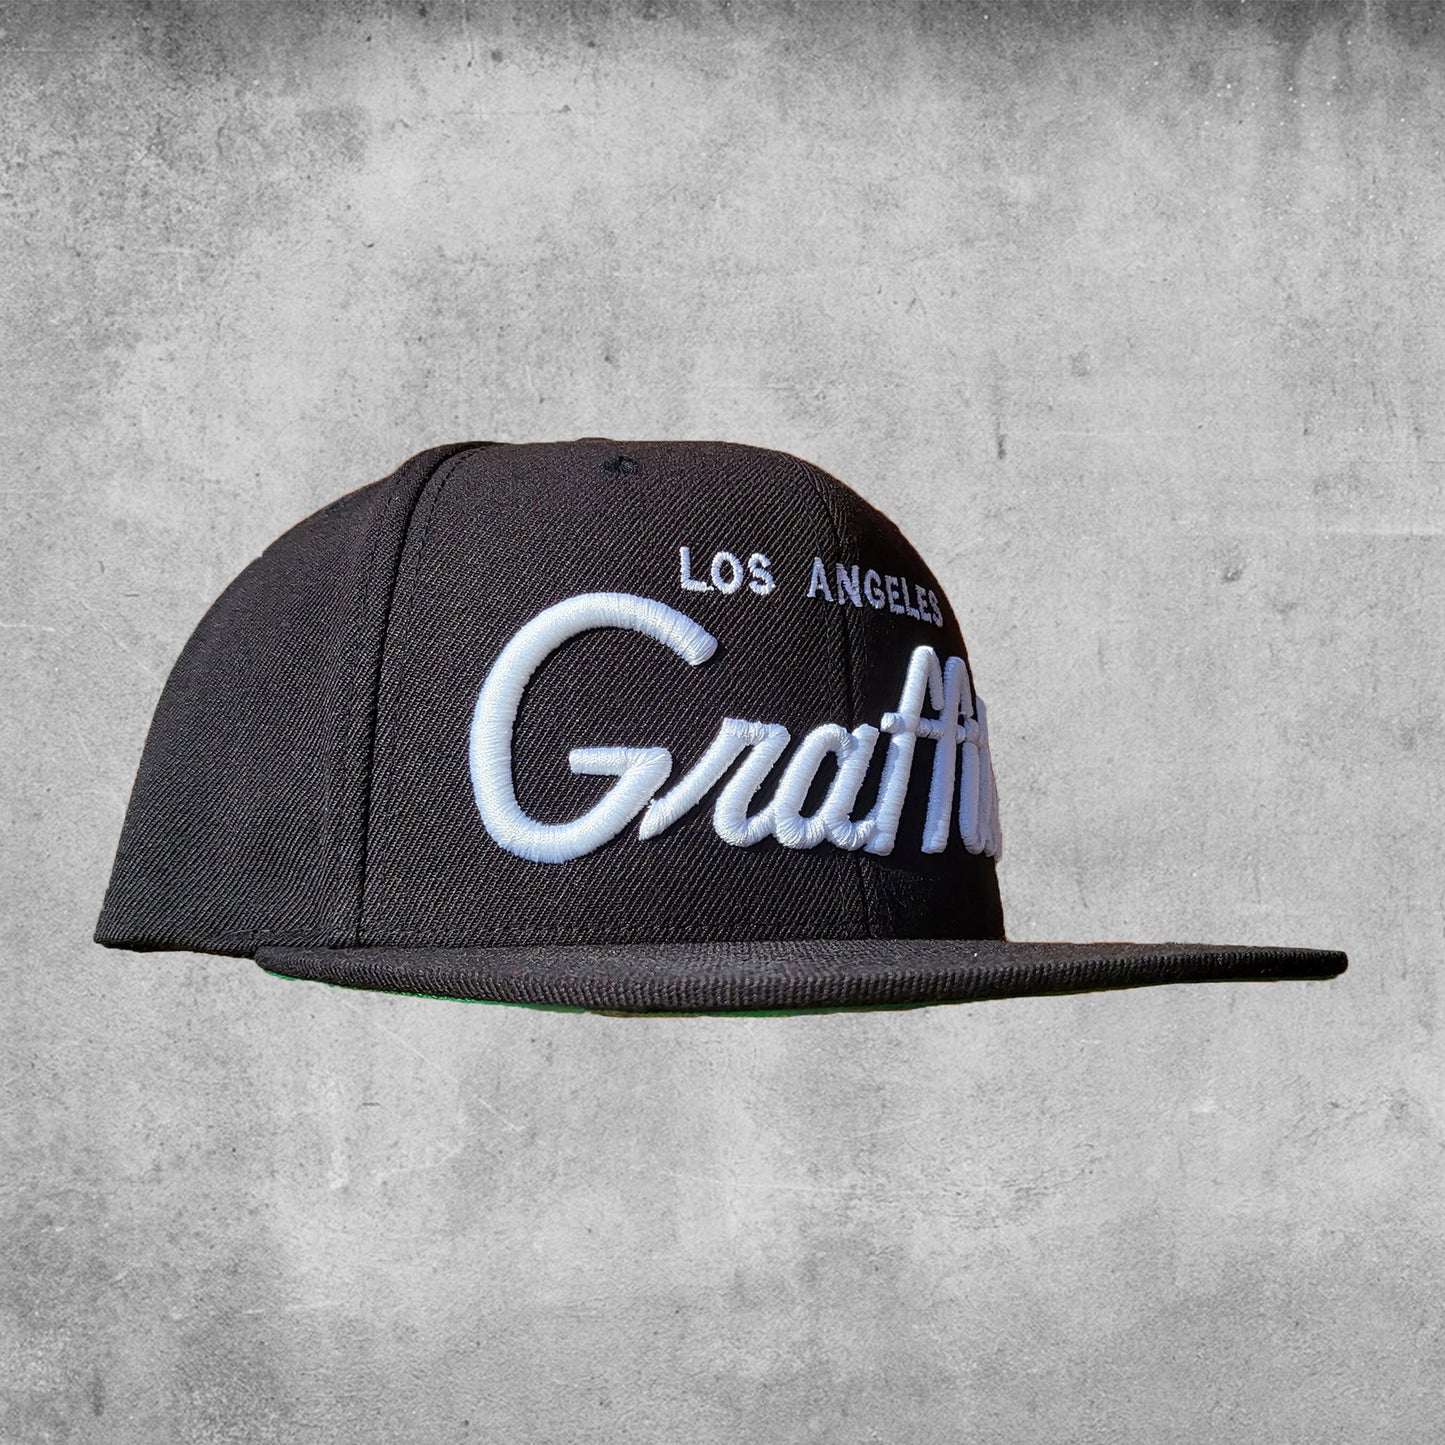 black cap with "los Angeles Graffiti" embroidered in white